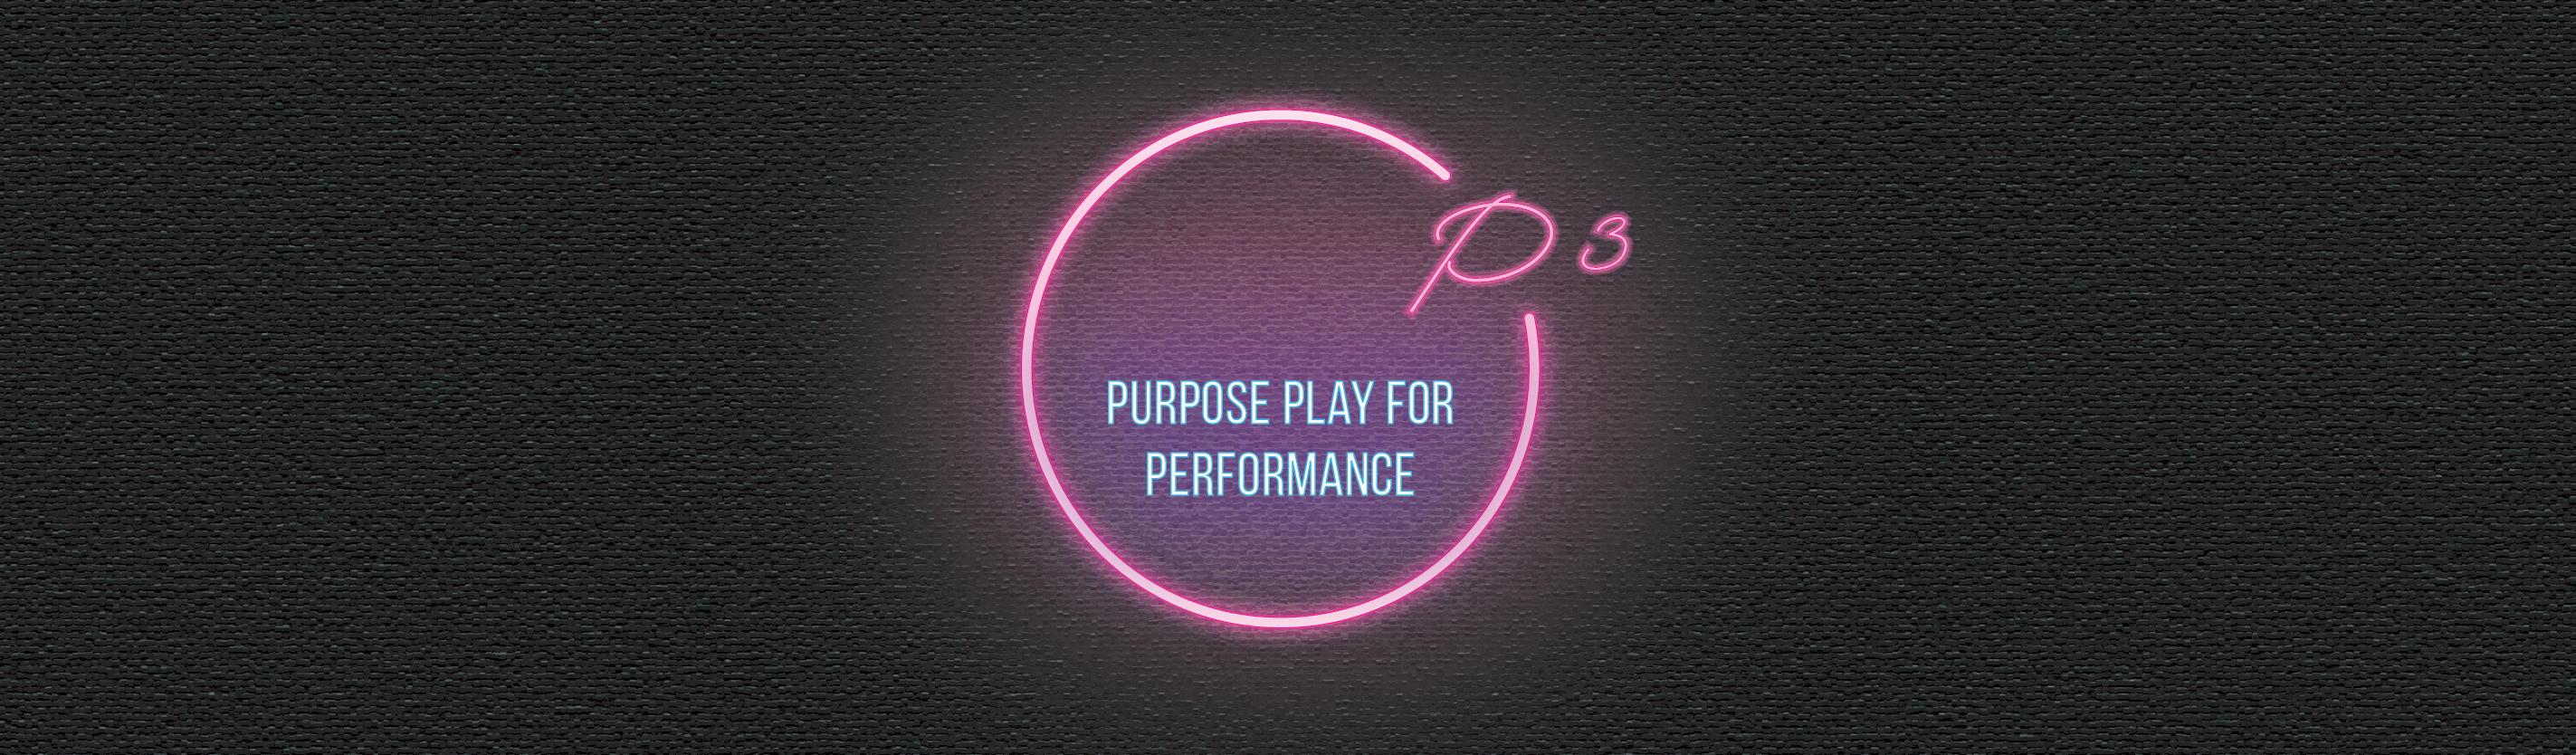 Purpose Play for Performance 